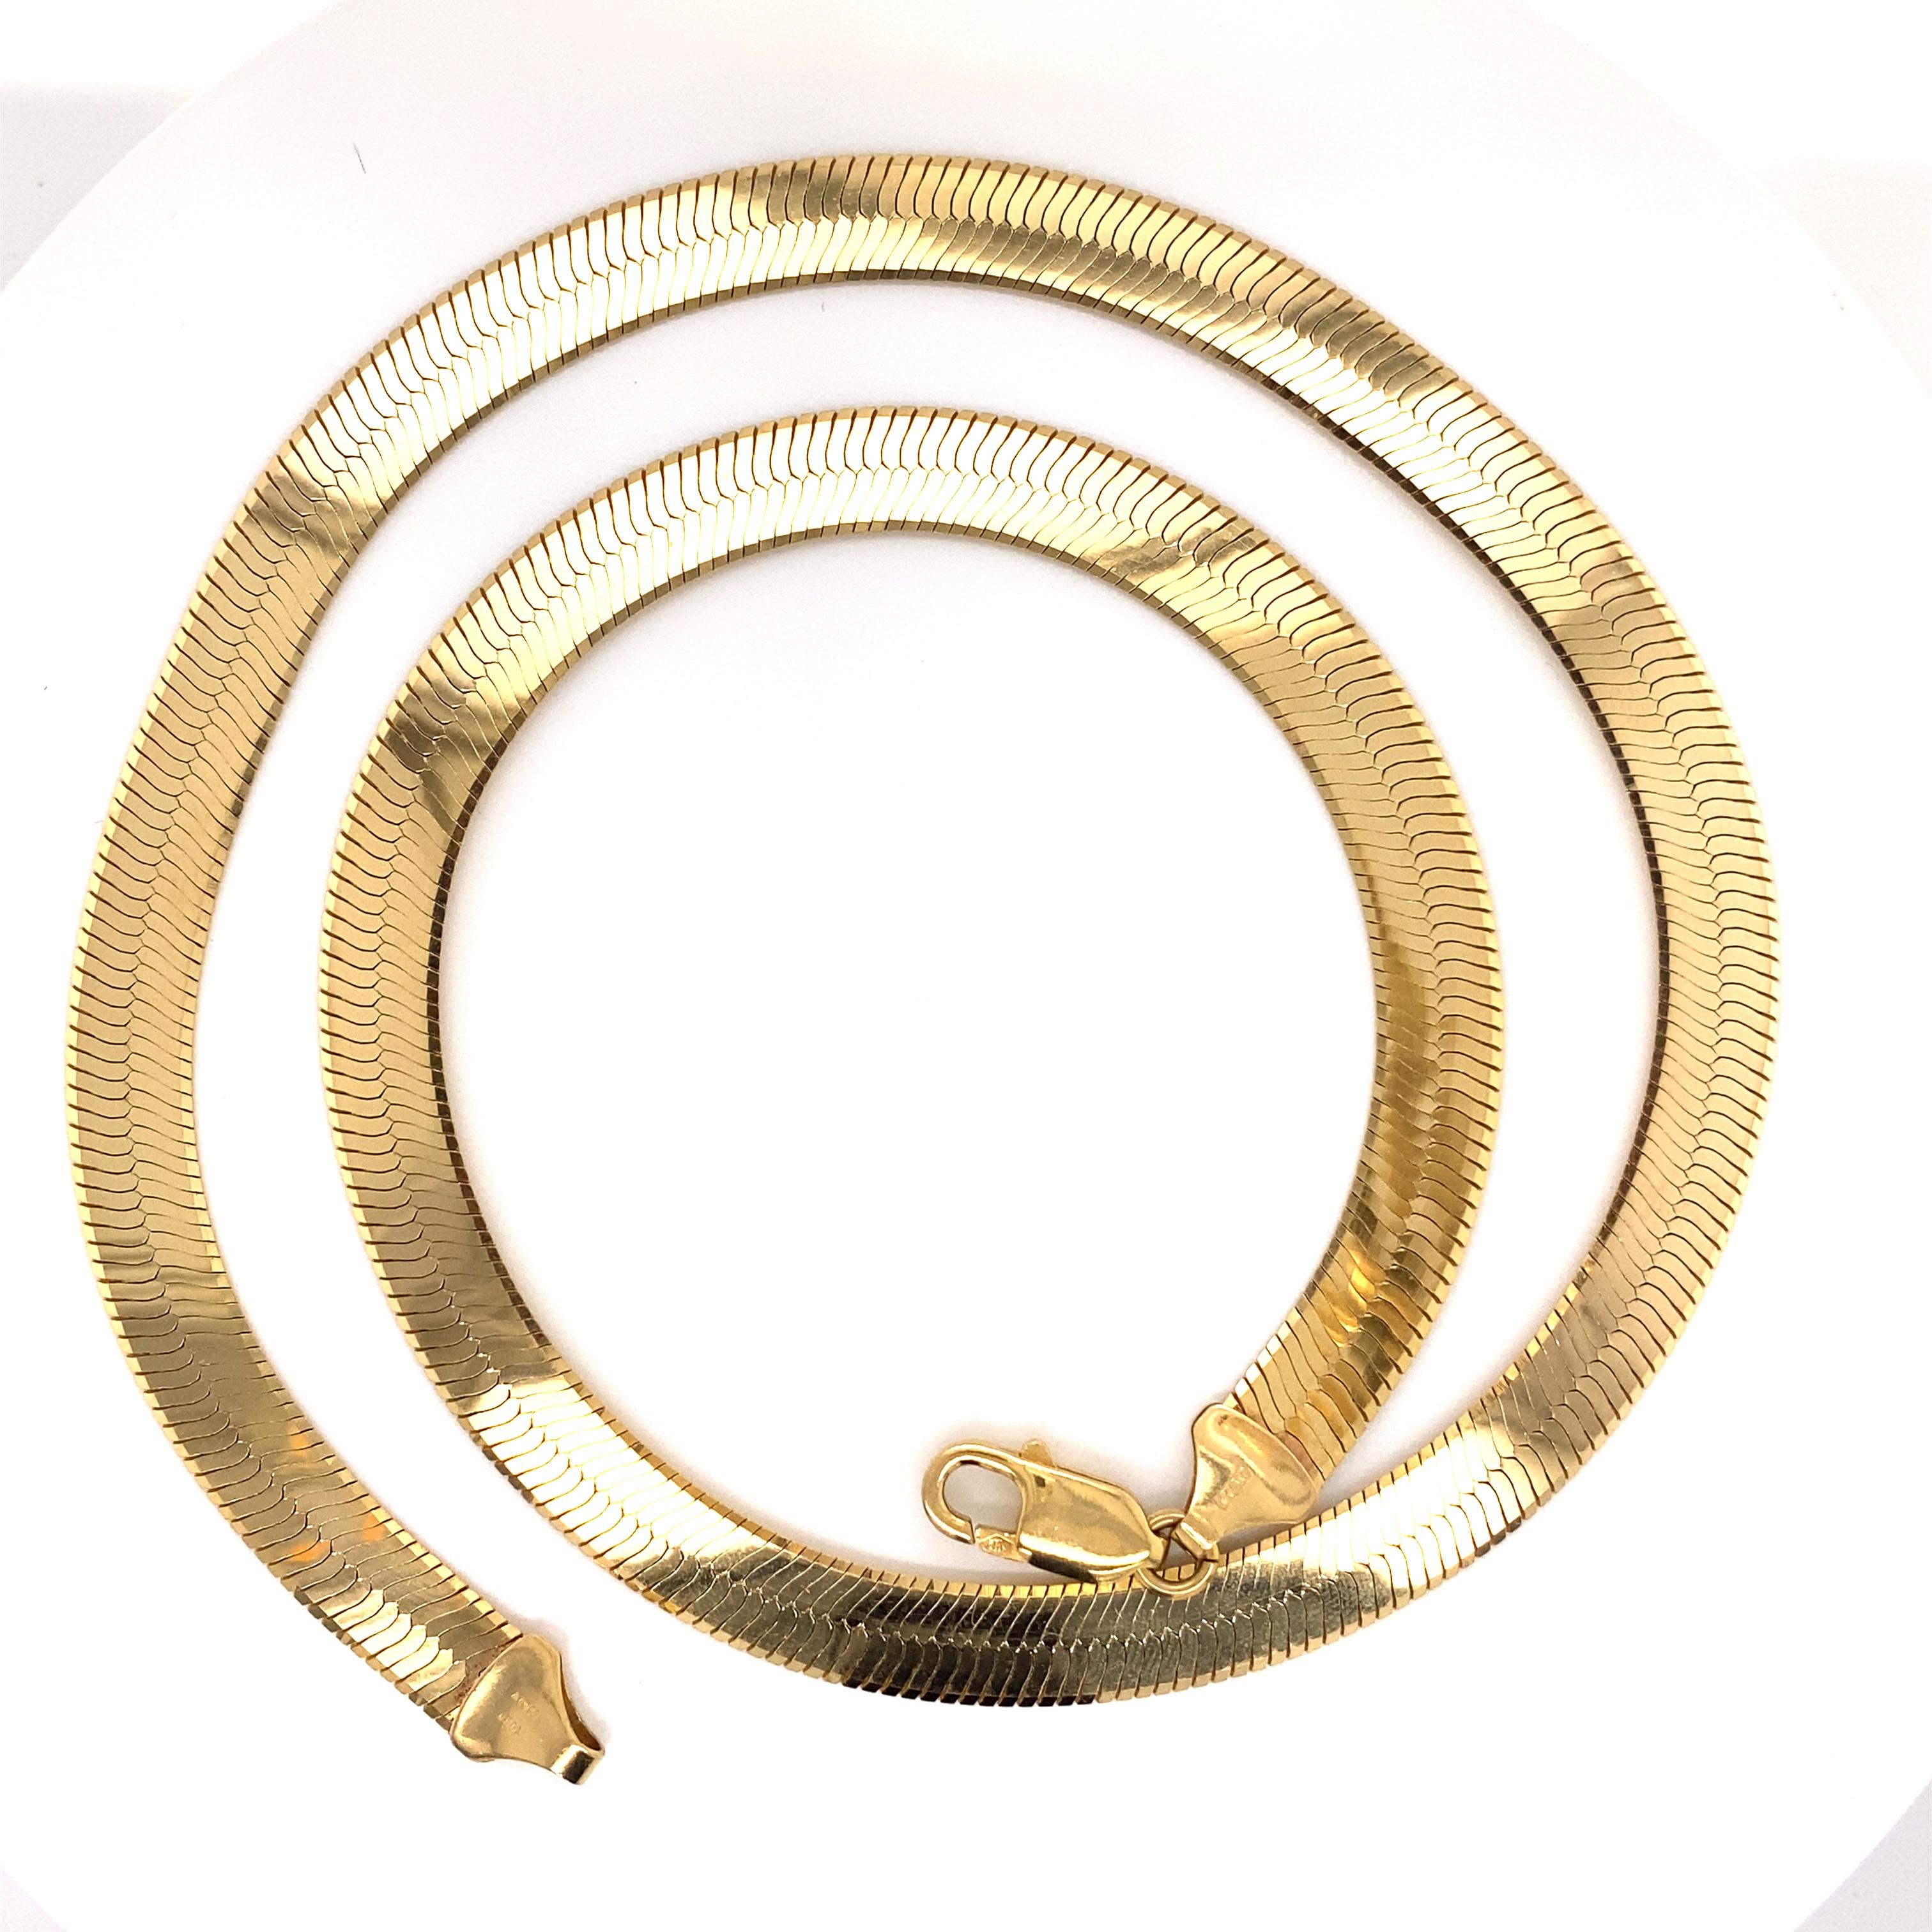 Vintage 1990’s 14K Yellow Gold Wide Herringbone Necklace - The Italian made herringbone necklace is 8mm wide and 20 inches long and features a large lobster clasp. The necklace weighs 30 grams.